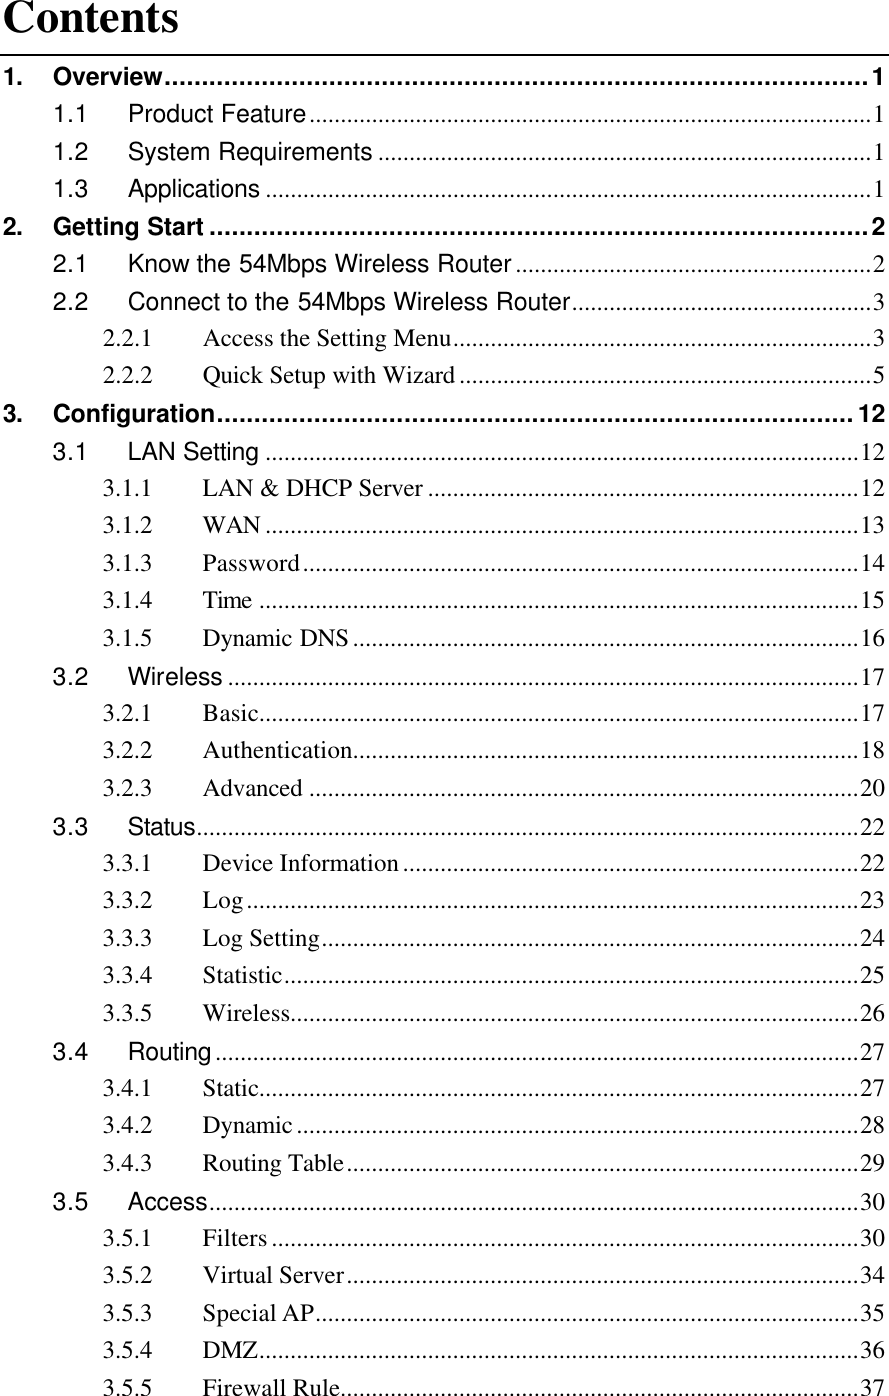  Contents 1. Overview..............................................................................................1 1.1 Product Feature..........................................................................................1 1.2 System Requirements ...............................................................................1 1.3 Applications .................................................................................................1 2. Getting Start ........................................................................................2 2.1 Know the 54Mbps Wireless Router.........................................................2 2.2 Connect to the 54Mbps Wireless Router................................................3 2.2.1  Access the Setting Menu...................................................................3 2.2.2  Quick Setup with Wizard..................................................................5 3. Configuration.....................................................................................12 3.1 LAN Setting ...............................................................................................12 3.1.1  LAN &amp; DHCP Server .....................................................................12 3.1.2  WAN ...............................................................................................13 3.1.3  Password.........................................................................................14 3.1.4  Time ................................................................................................15 3.1.5  Dynamic DNS.................................................................................16 3.2 Wireless .....................................................................................................17 3.2.1  Basic................................................................................................17 3.2.2  Authentication.................................................................................18 3.2.3  Advanced ........................................................................................20 3.3 Status..........................................................................................................22 3.3.1  Device Information.........................................................................22 3.3.2  Log..................................................................................................23 3.3.3  Log Setting......................................................................................24 3.3.4  Statistic............................................................................................25 3.3.5  Wireless...........................................................................................26 3.4 Routing.......................................................................................................27 3.4.1  Static................................................................................................27 3.4.2  Dynamic..........................................................................................28 3.4.3  Routing Table..................................................................................29 3.5 Access........................................................................................................30 3.5.1  Filters..............................................................................................30 3.5.2  Virtual Server..................................................................................34 3.5.3  Special AP.......................................................................................35 3.5.4  DMZ................................................................................................36 3.5.5  Firewall Rule...................................................................................37 